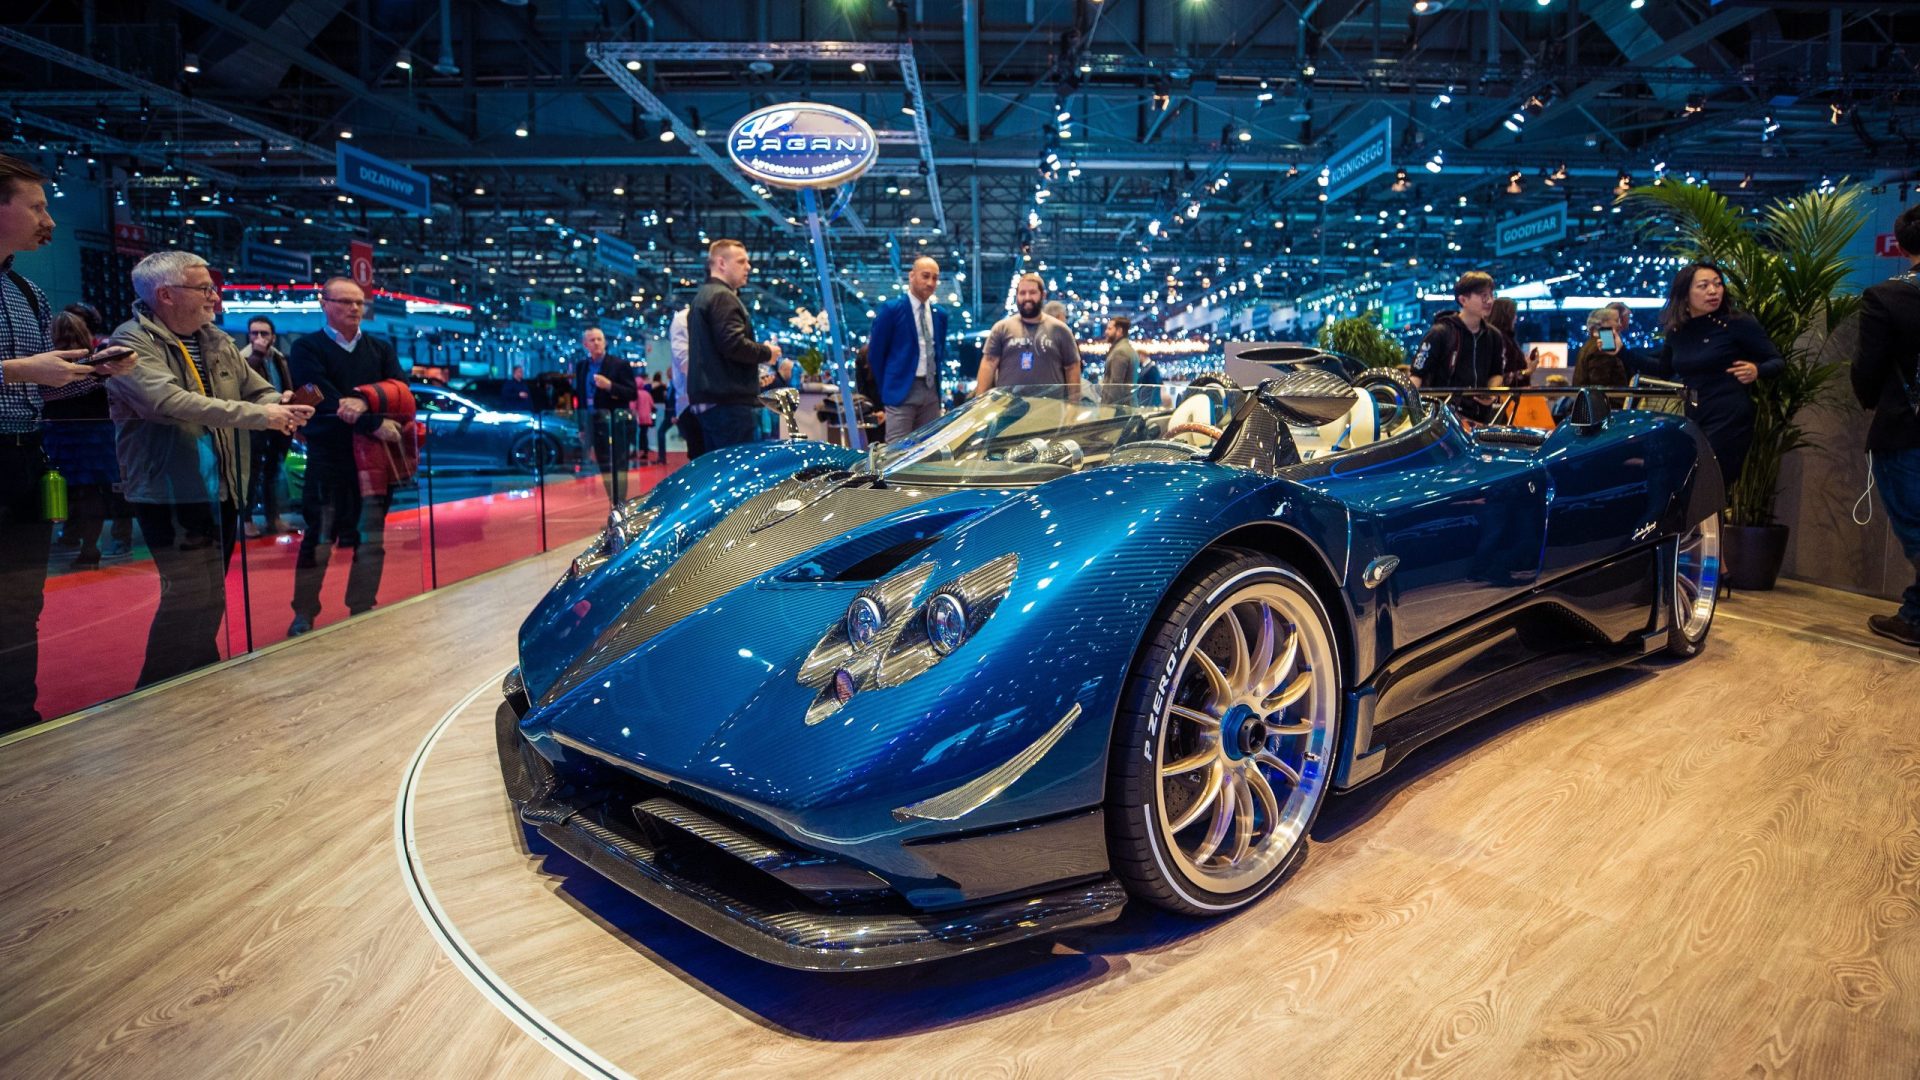 <ul> <li><strong>Approximate MSRP Price: </strong>$17.5 Million</li> </ul> <p>"The Zonda HP Barchetta is a vehicle that goes beyond mere transportation; it's a personal tribute to Pagani's vision of automotive perfection," said Patryk Doornebos, owner of <a href="https://cartriple.com" rel="noreferrer noopener">Car Triple</a>.</p> <p>With only three cars ever manufactured, these are rare commodities that are hard to find and what Doornebos described as "the very definition of a collector's dream, owned and designed by Horacio Pagani himself. It reflects a boundless affinity for detail and performance, with its roofless design and distinctive rear wheel covers."</p> <p><strong>Discover: <a href="https://www.gobankingrates.com/saving-money/car/these-cars-could-drain-your-savings-through-constant-repairs/?utm_term=related_link_6&utm_campaign=1255085&utm_source=msn.com&utm_content=9&utm_medium=rss" rel="">These 10 Cars Could Drain Your Savings Through Constant Repairs</a></strong></p>